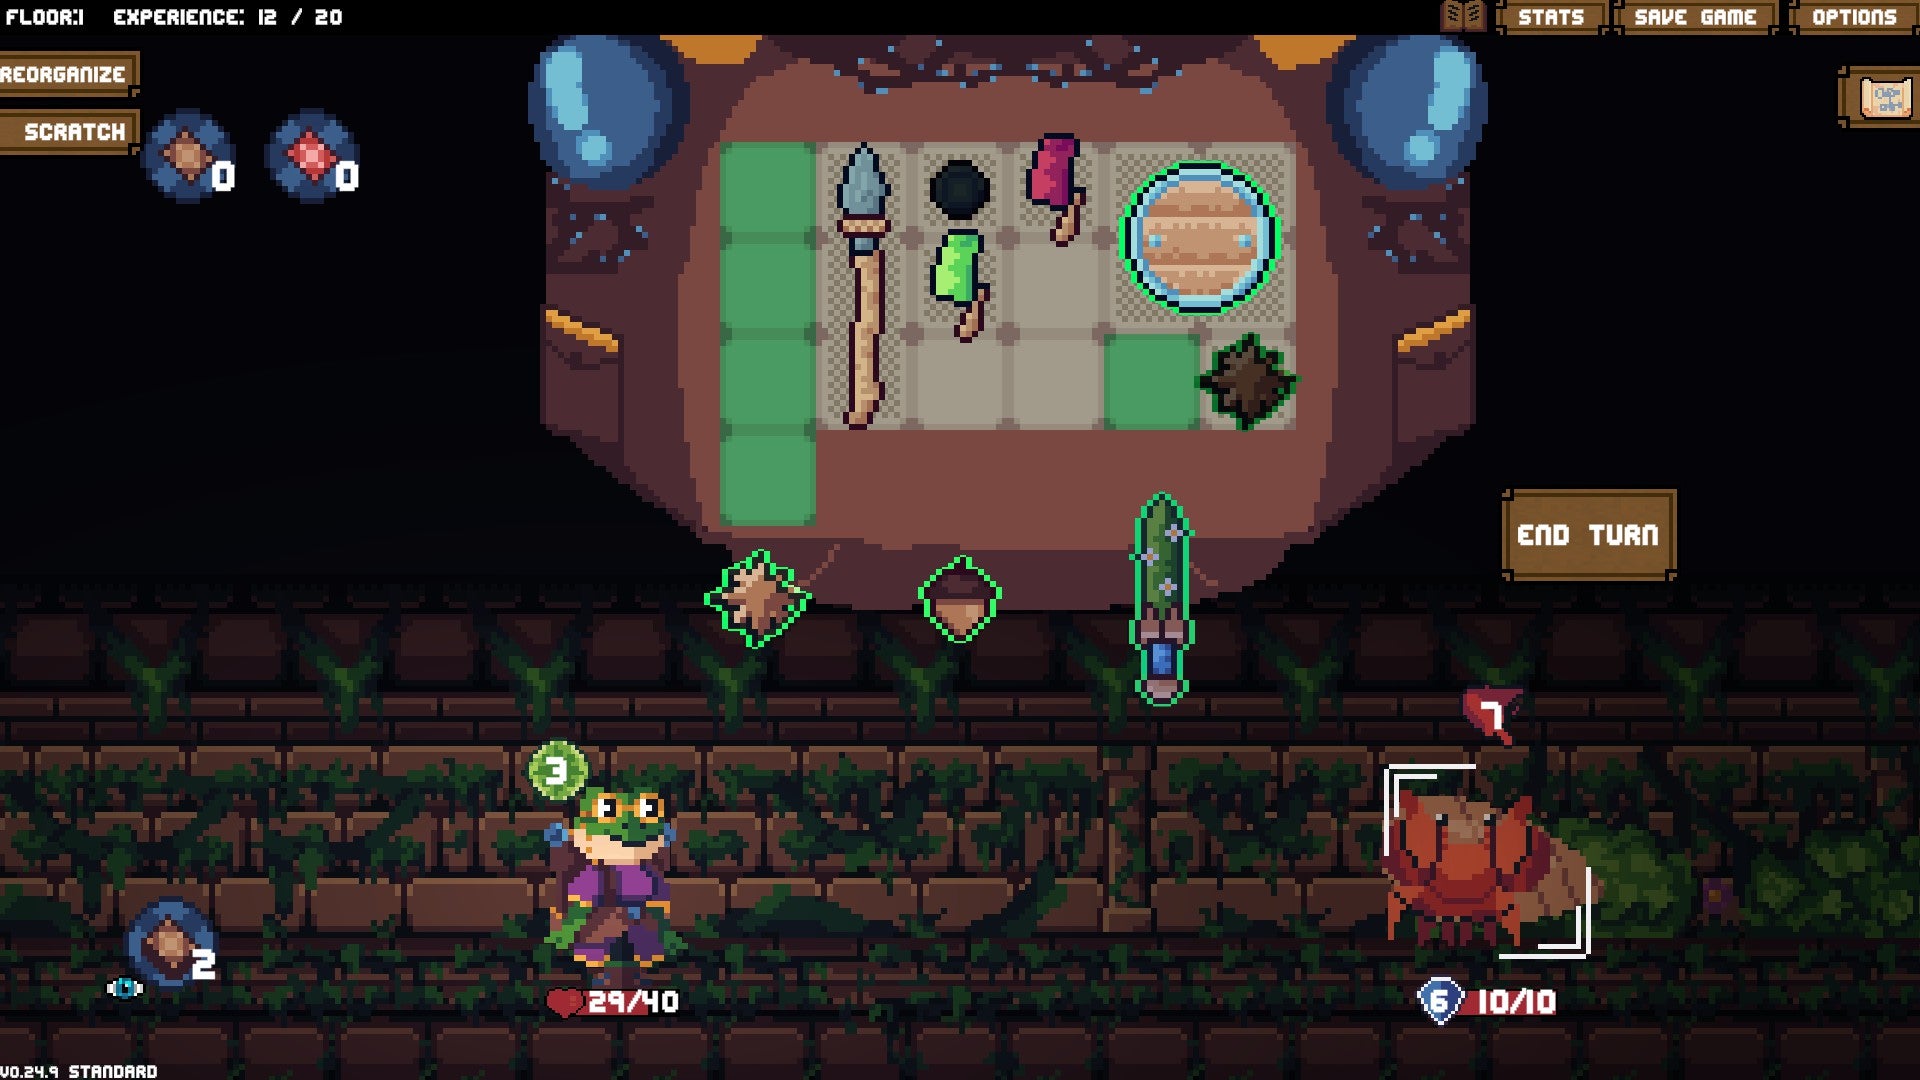 A small frog character stands under a huge open backpack that fills half the screen, organized into tiles and there are a variety of weapons and items that fill those tiles.